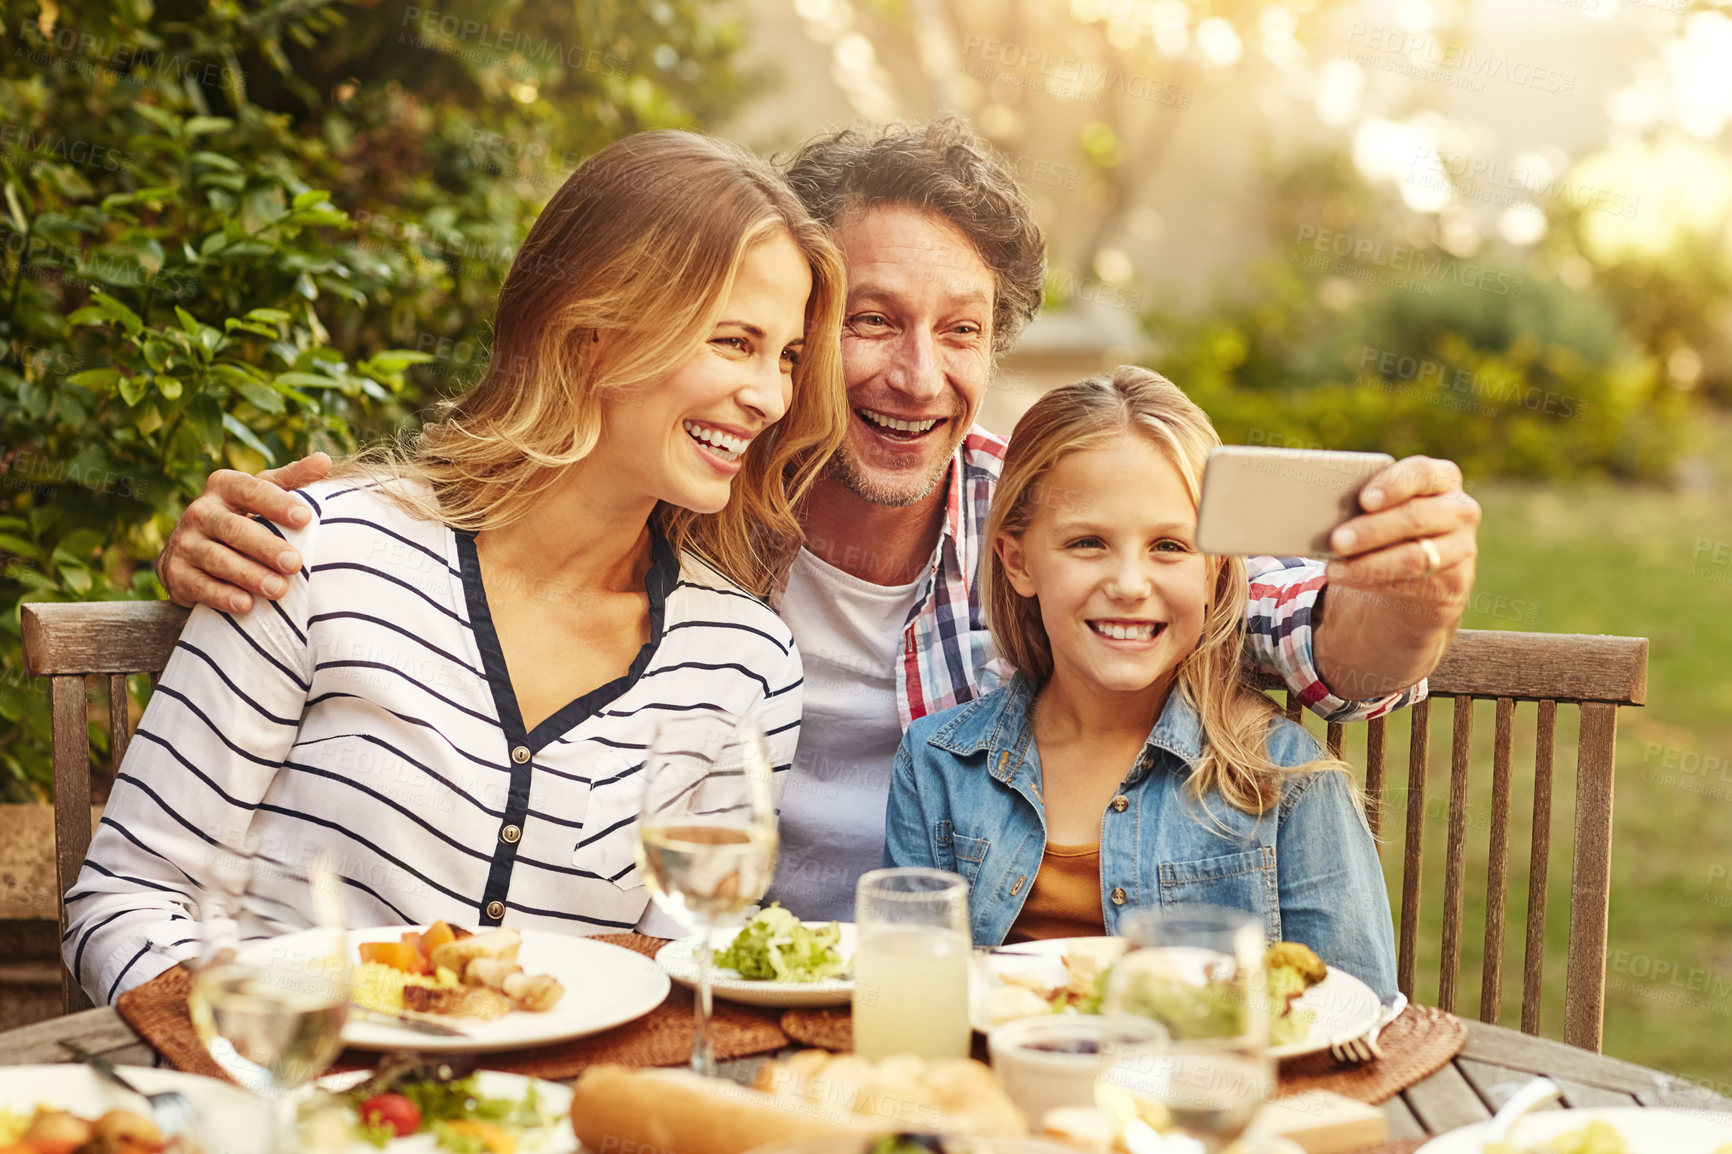 Buy stock photo Shot of a happy family taking a selfie together at an outdoor lunch